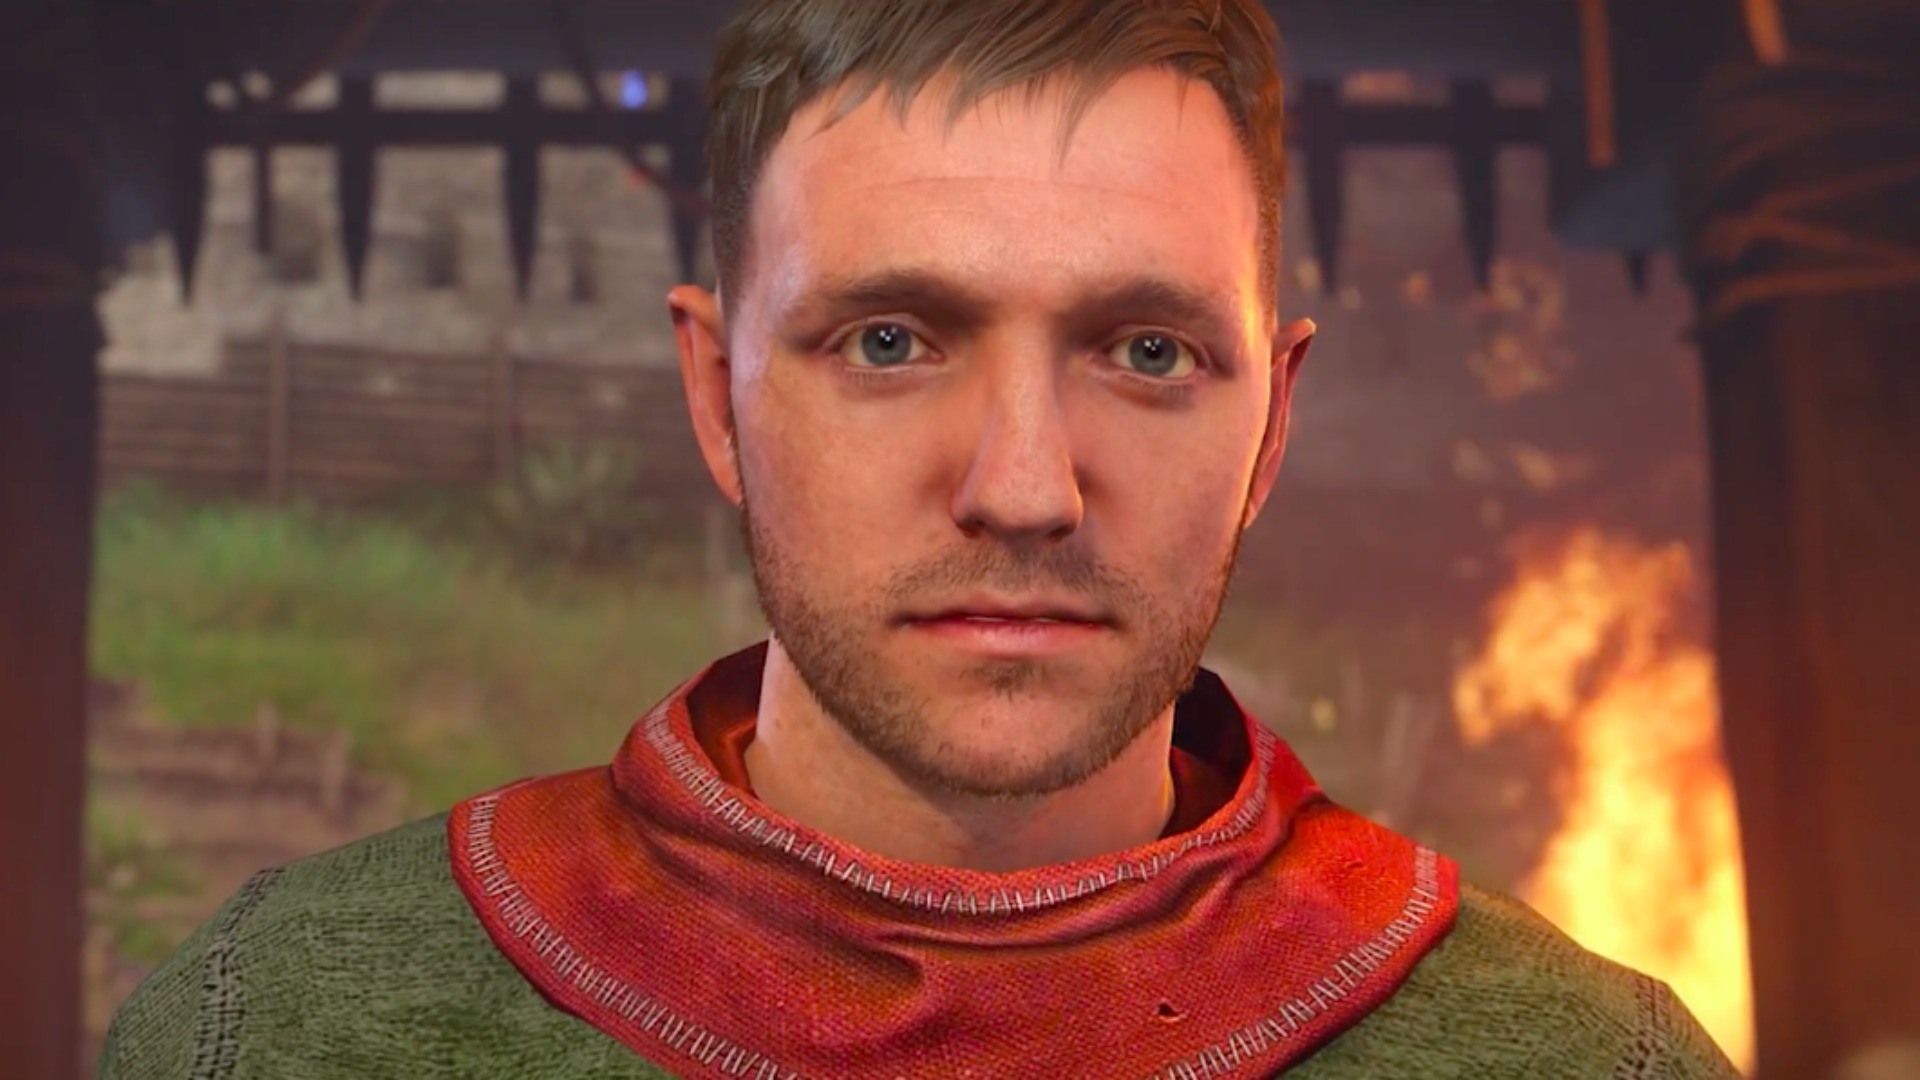 Lucky playing die, Kingdom Come: Deliverance Wiki